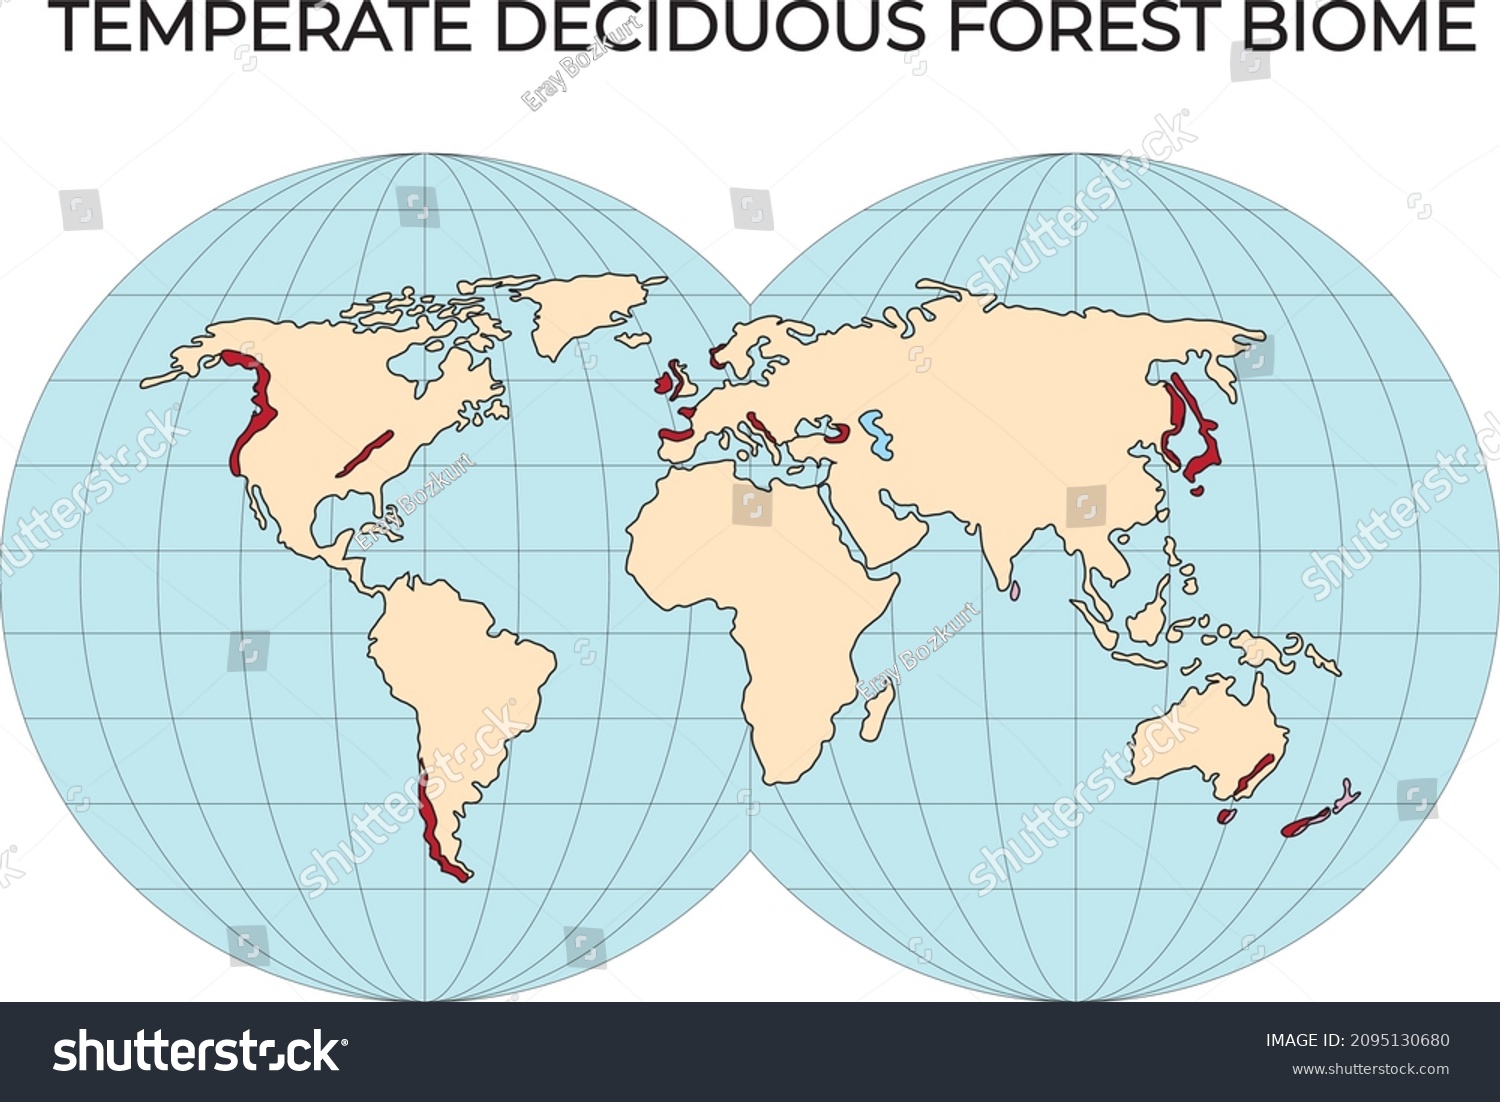 SVG of Biomes. Terrestrial ecosystem is a community of living organisms. Biotope: montane, desert, tropics, savanna, steppe, mediterranean, mixed forest, taiga, tundra and polar desert. world map svg